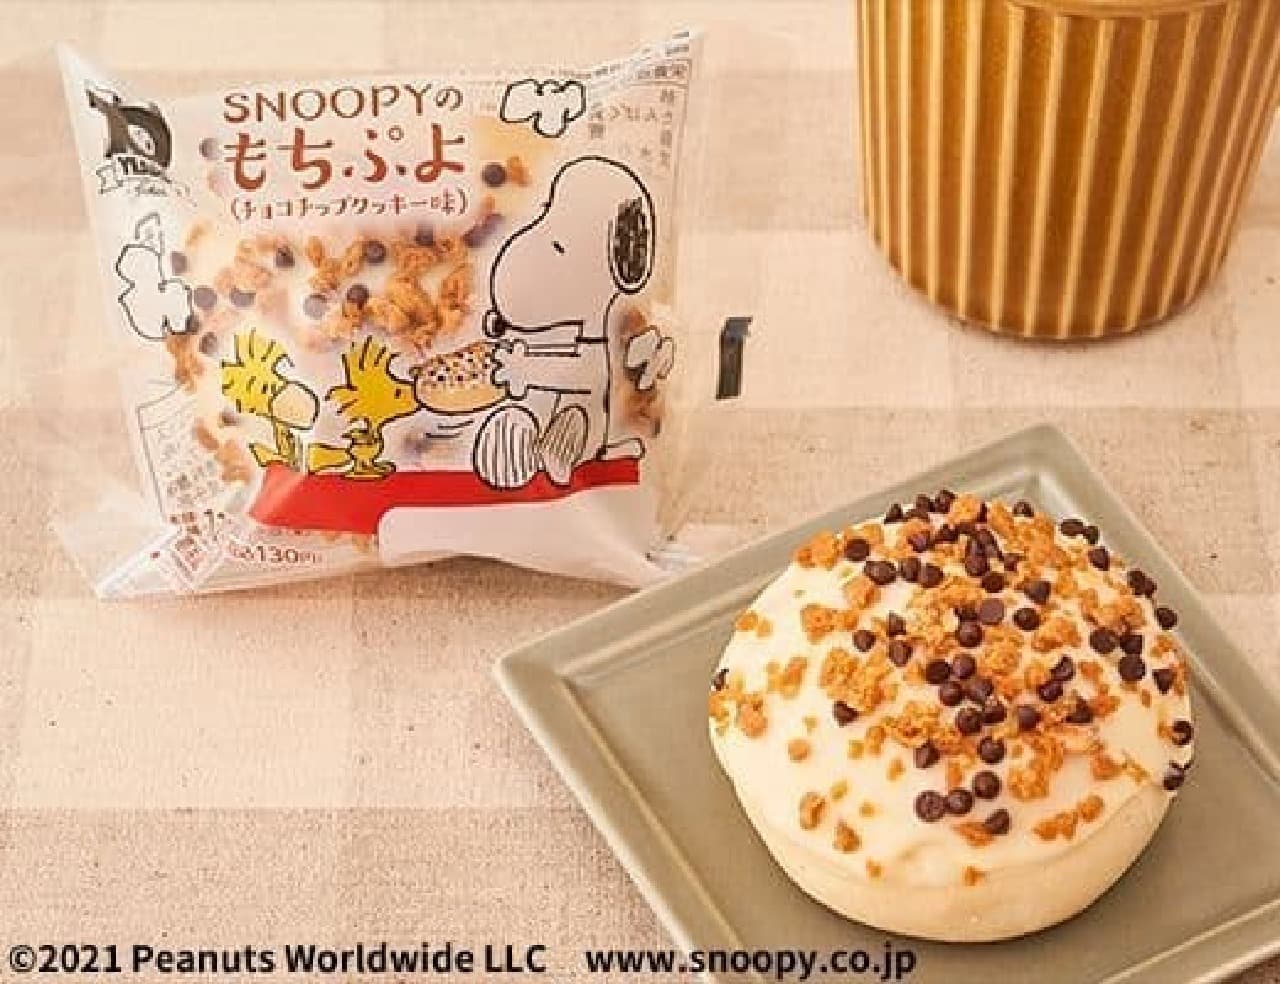 Lawson "SNOOPY Mochipuyo Chocolate Chip Cookie Flavor"